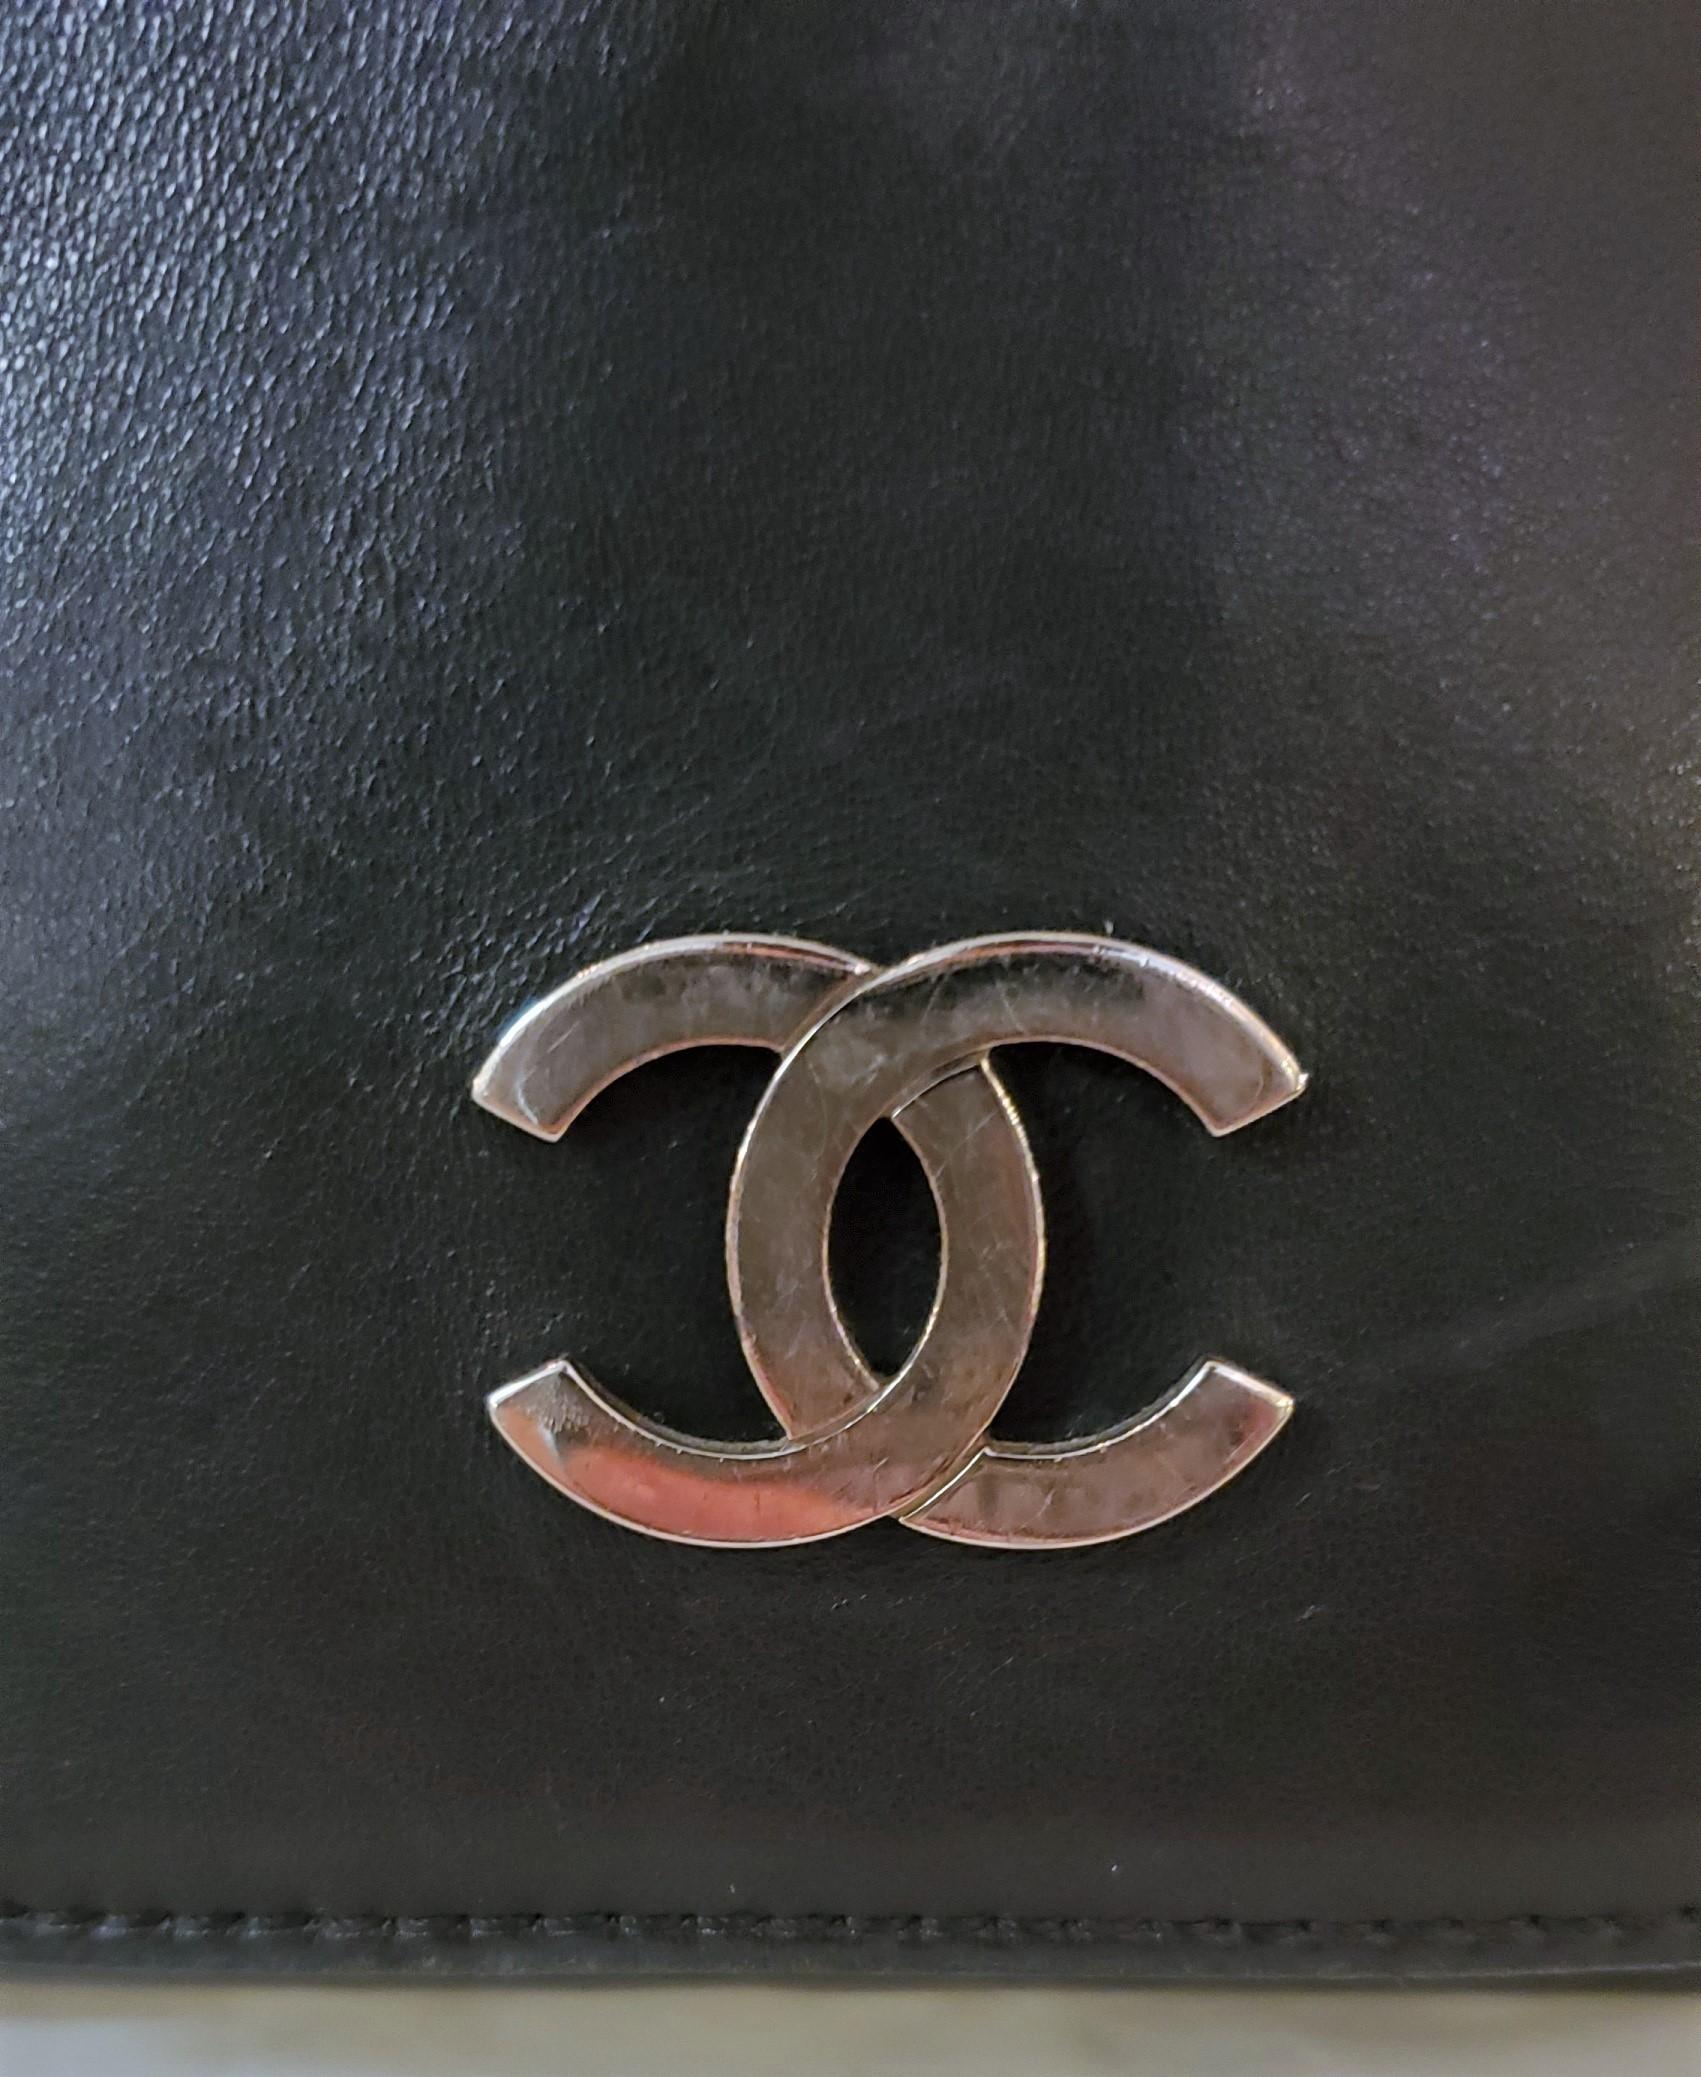 Auth Vintage Chanel Jumbo Leather Chained Handbag For Sale 3